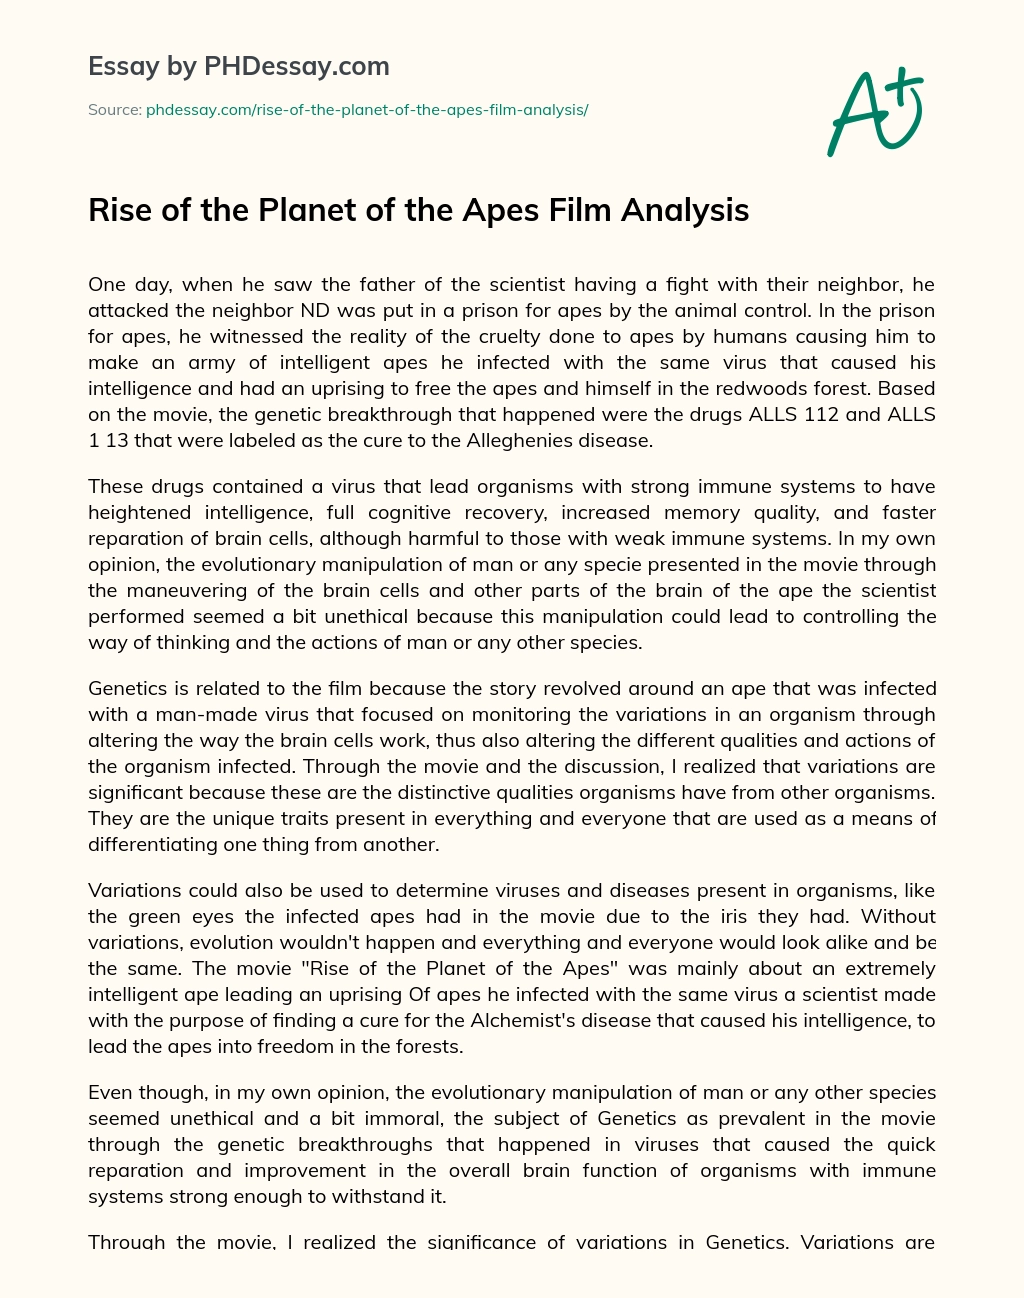 Rise of the Planet of the Apes Film Analysis essay